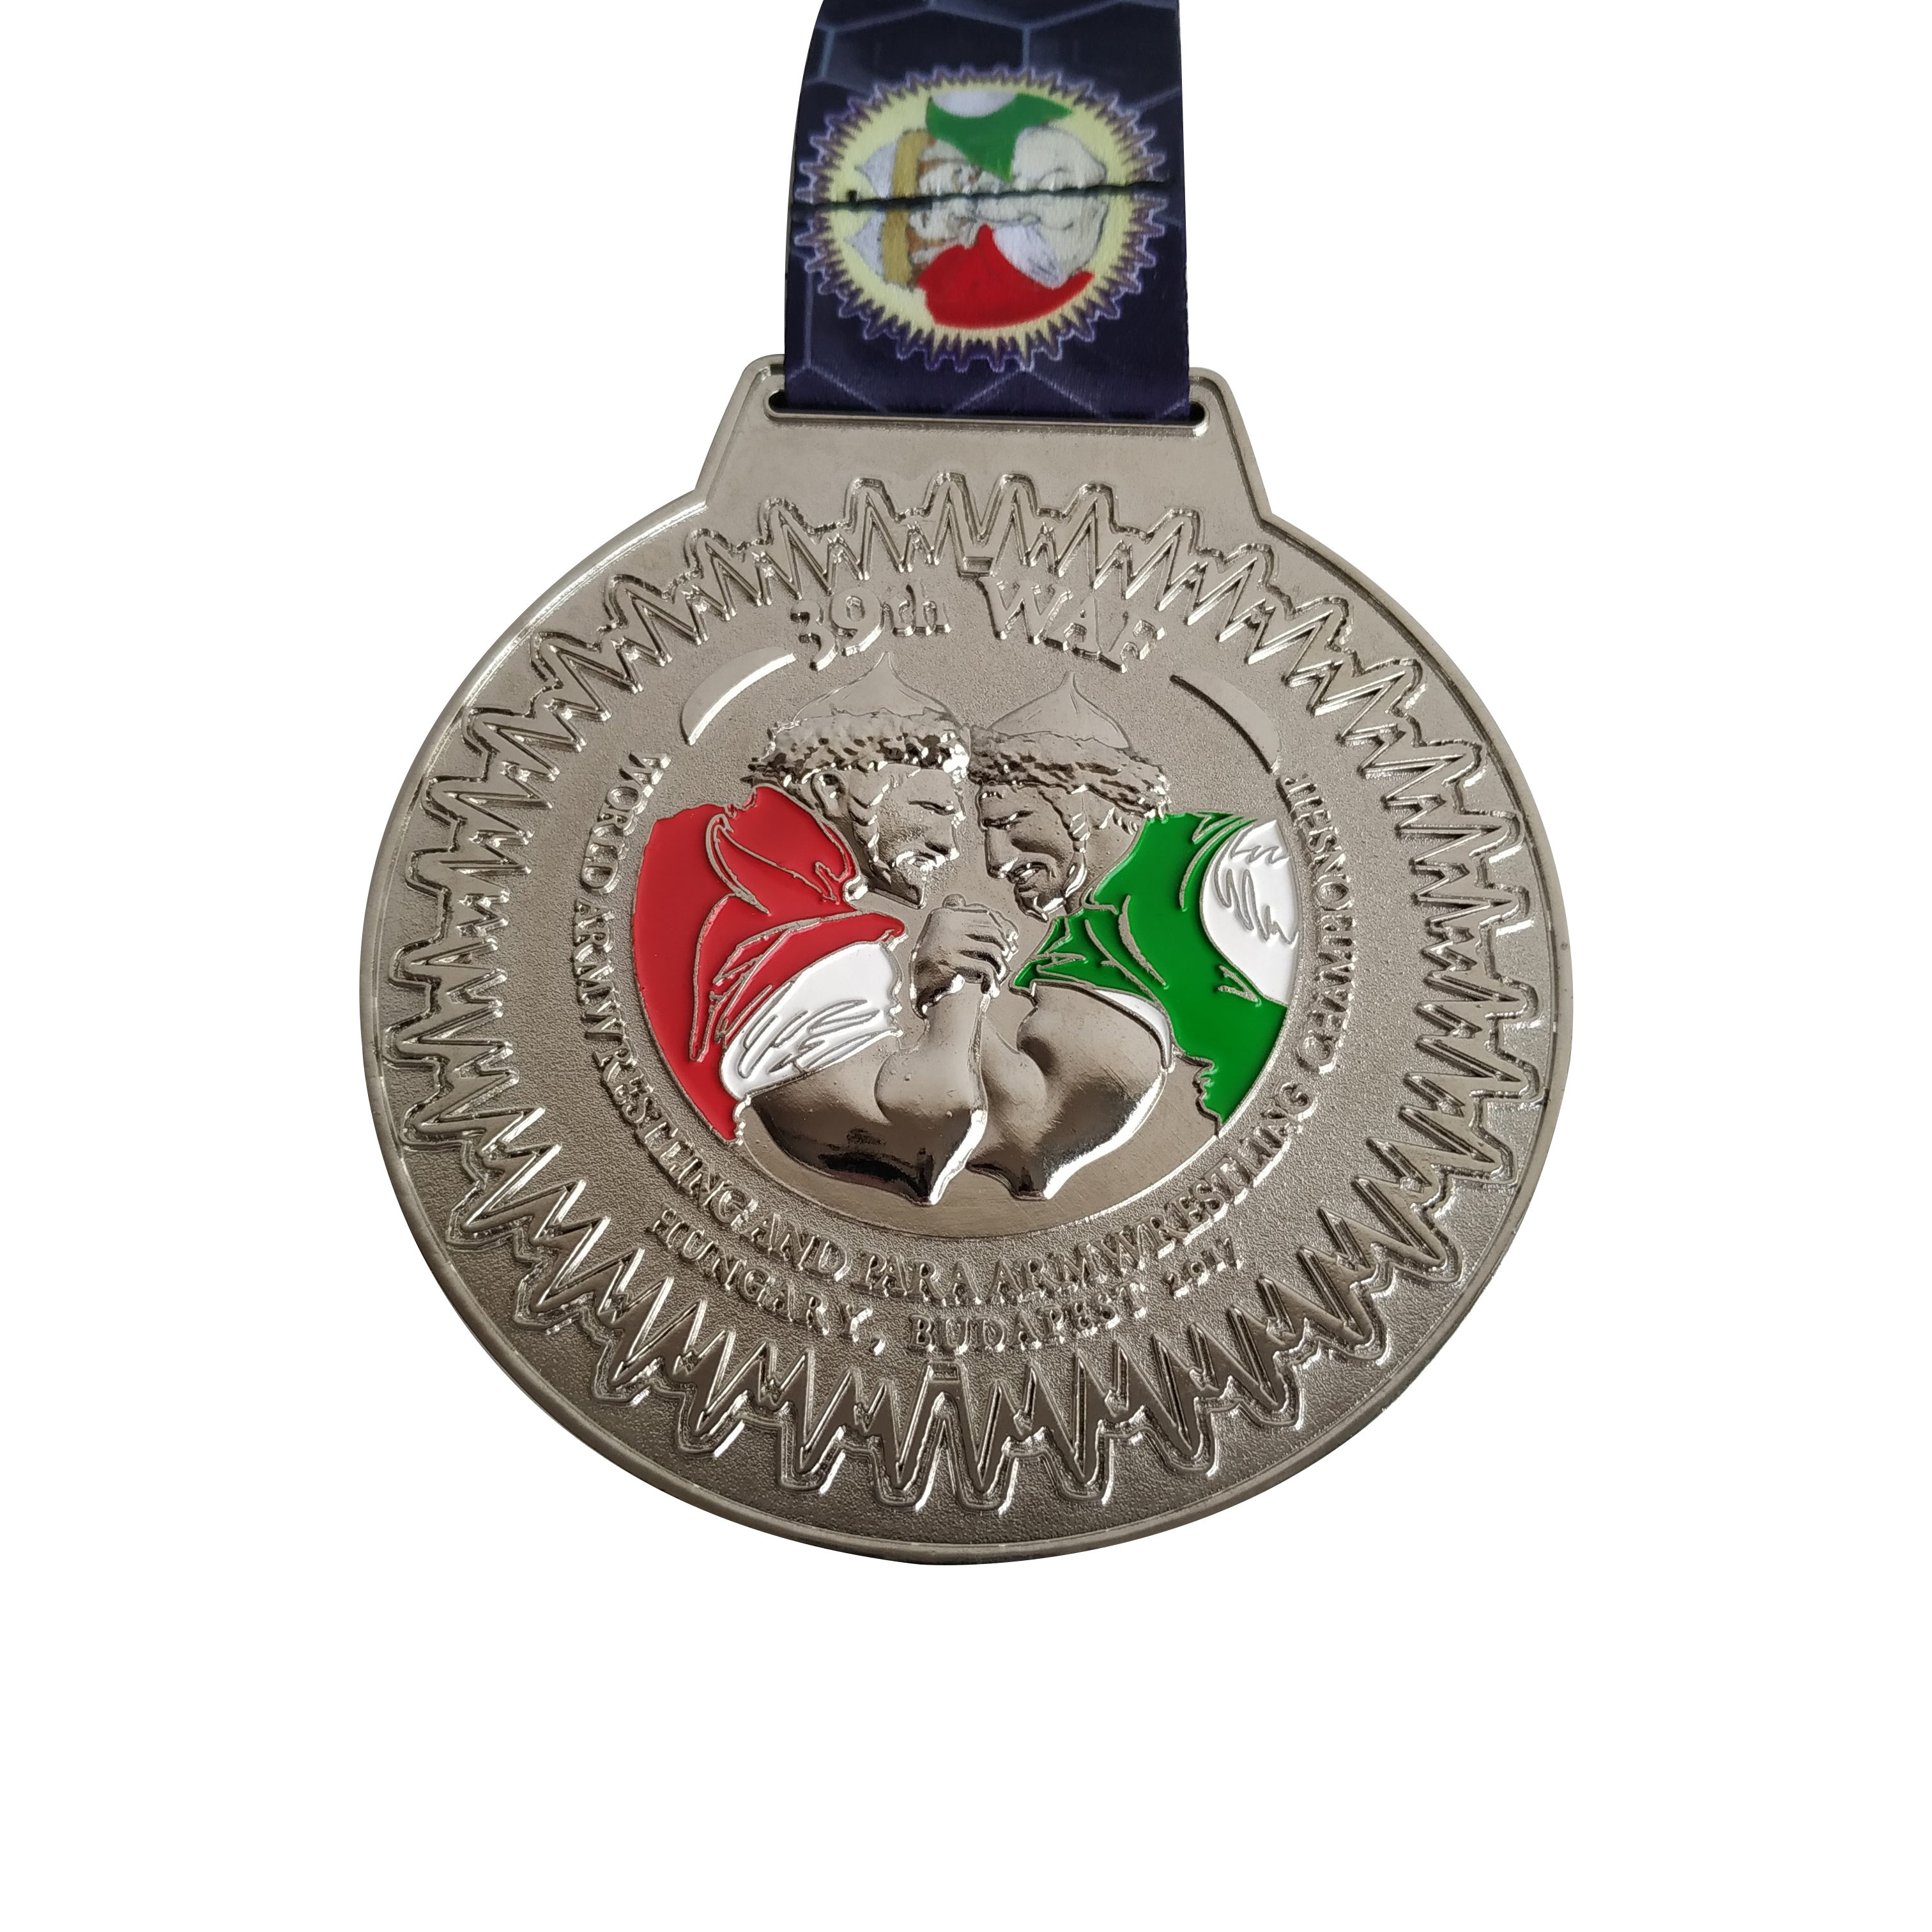 3D The 39th WAF Arm Wrestling Games Sports Events Competition Medal